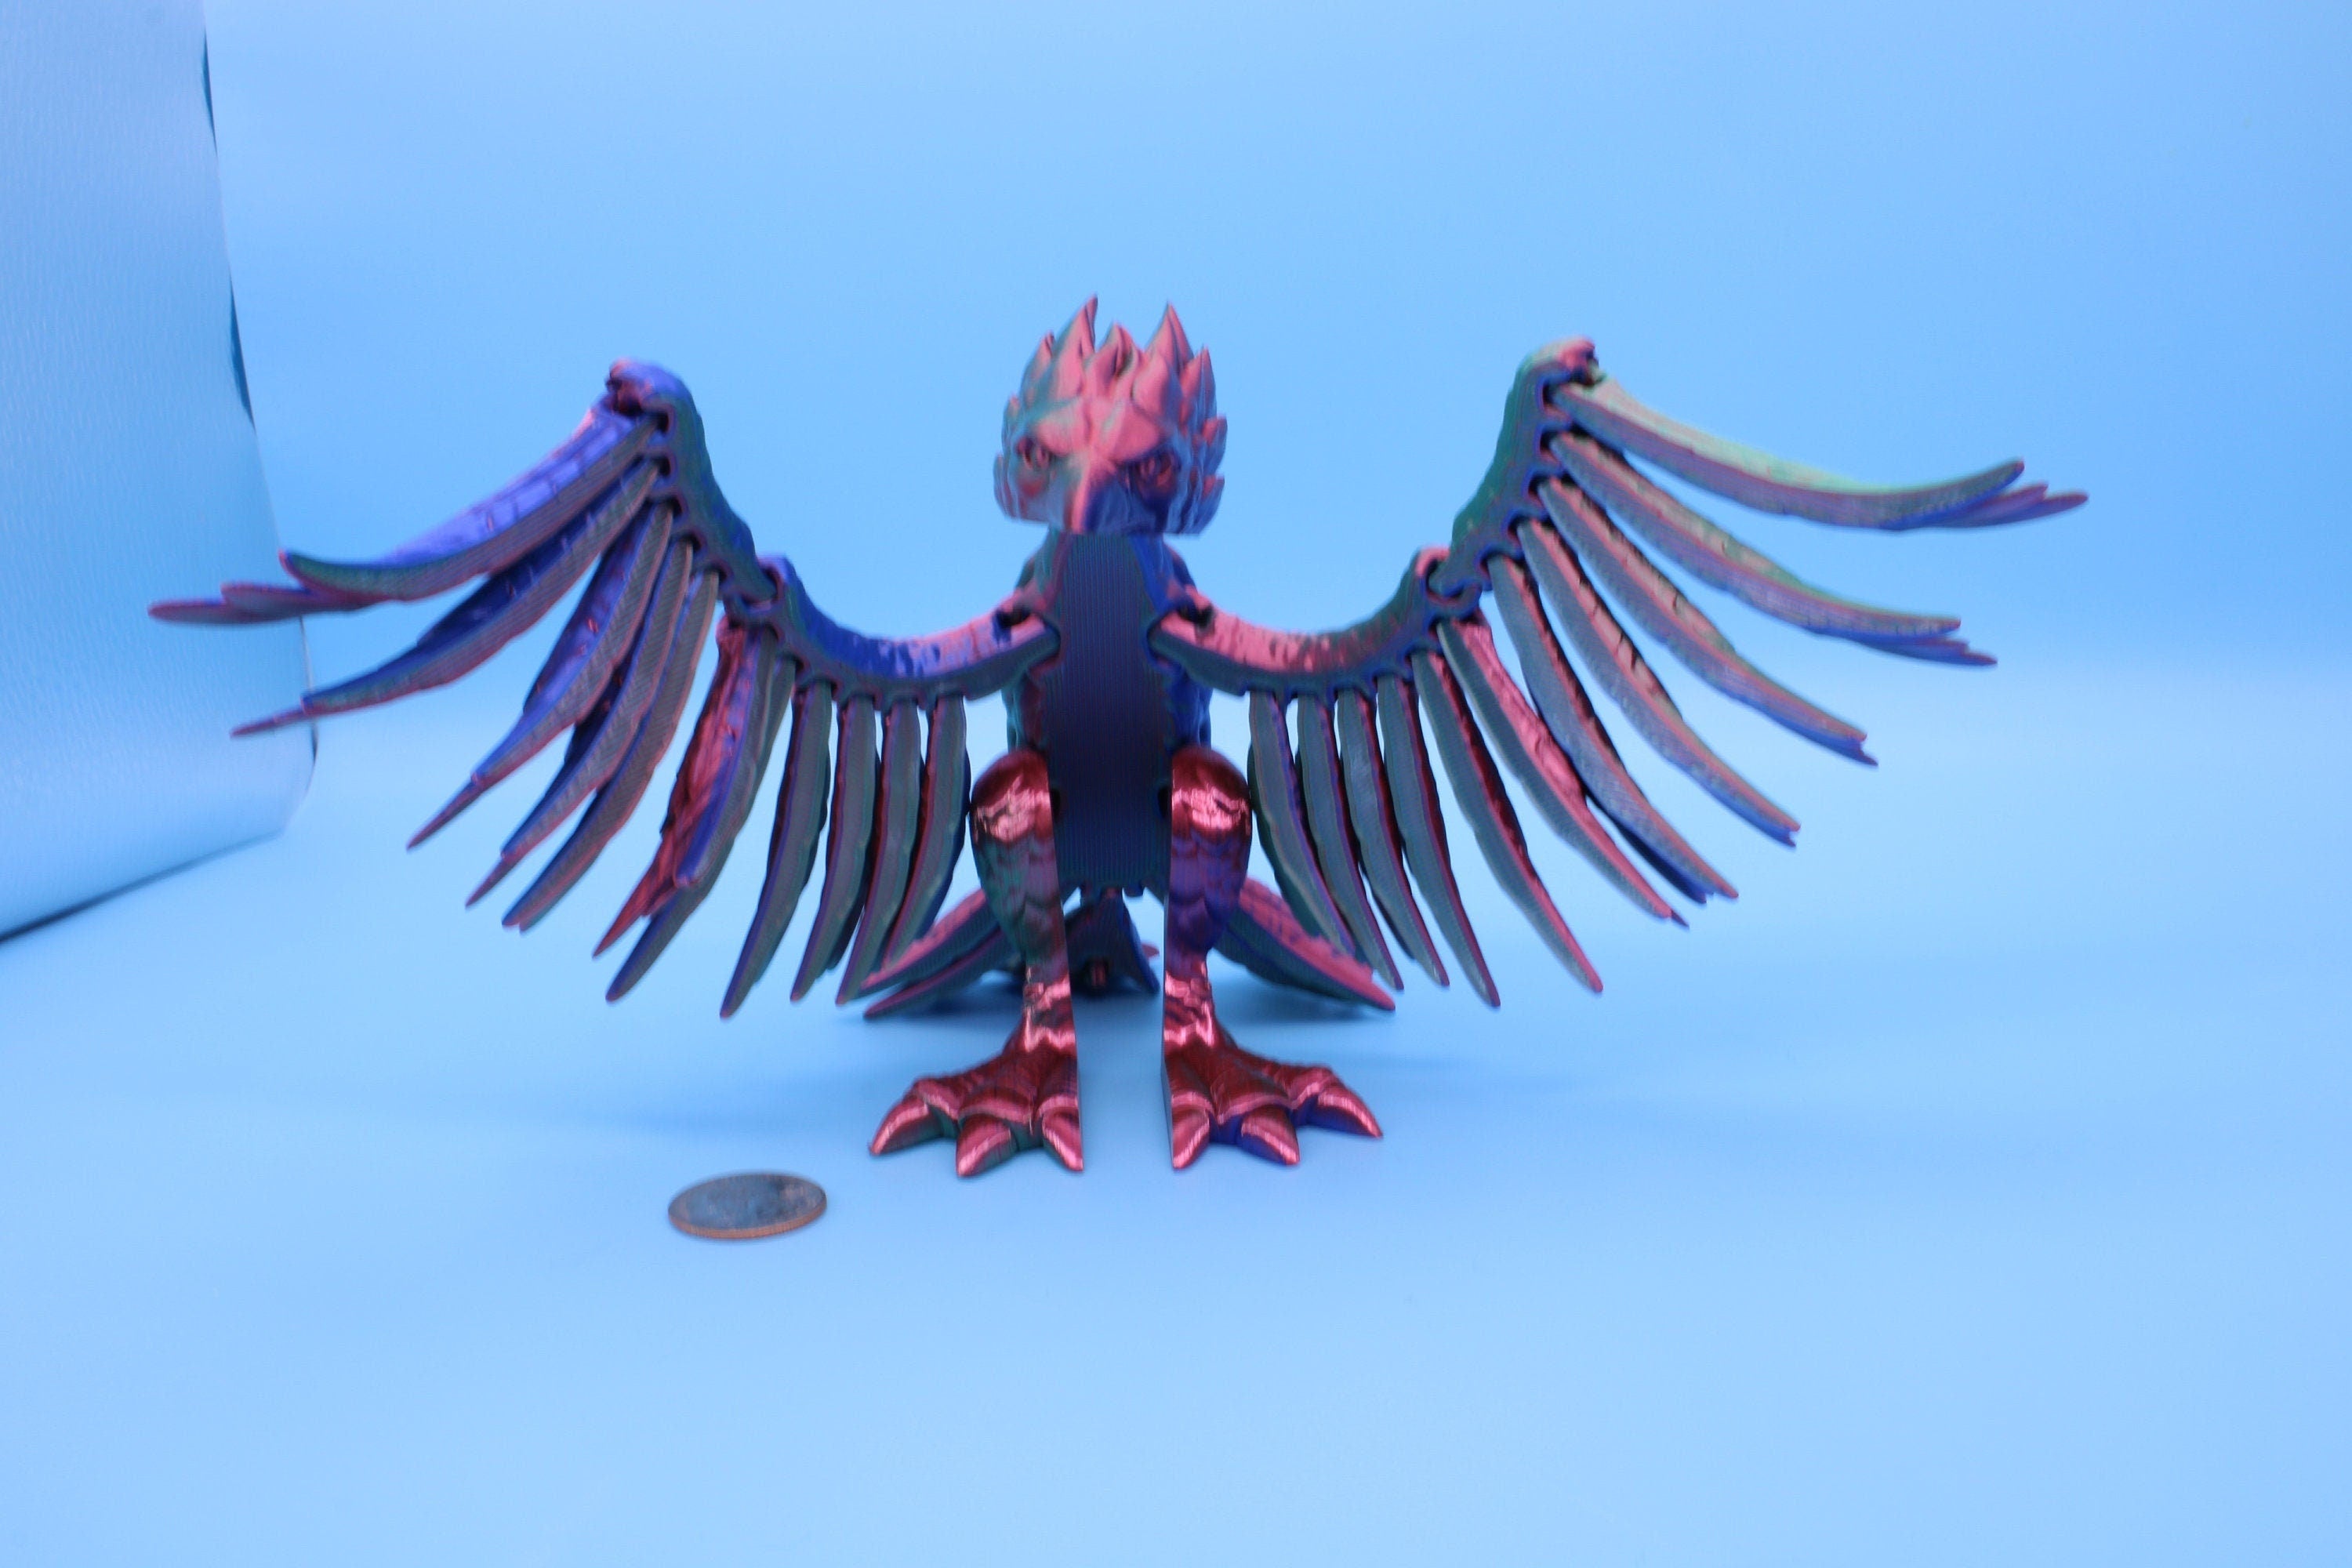 XL Phoenix Rainbow | Cute Flexi | Unique 3D printed. | Great Articulating fidget toy, desk, sensory toy | 5.5 inch tall | 10 in wing span.